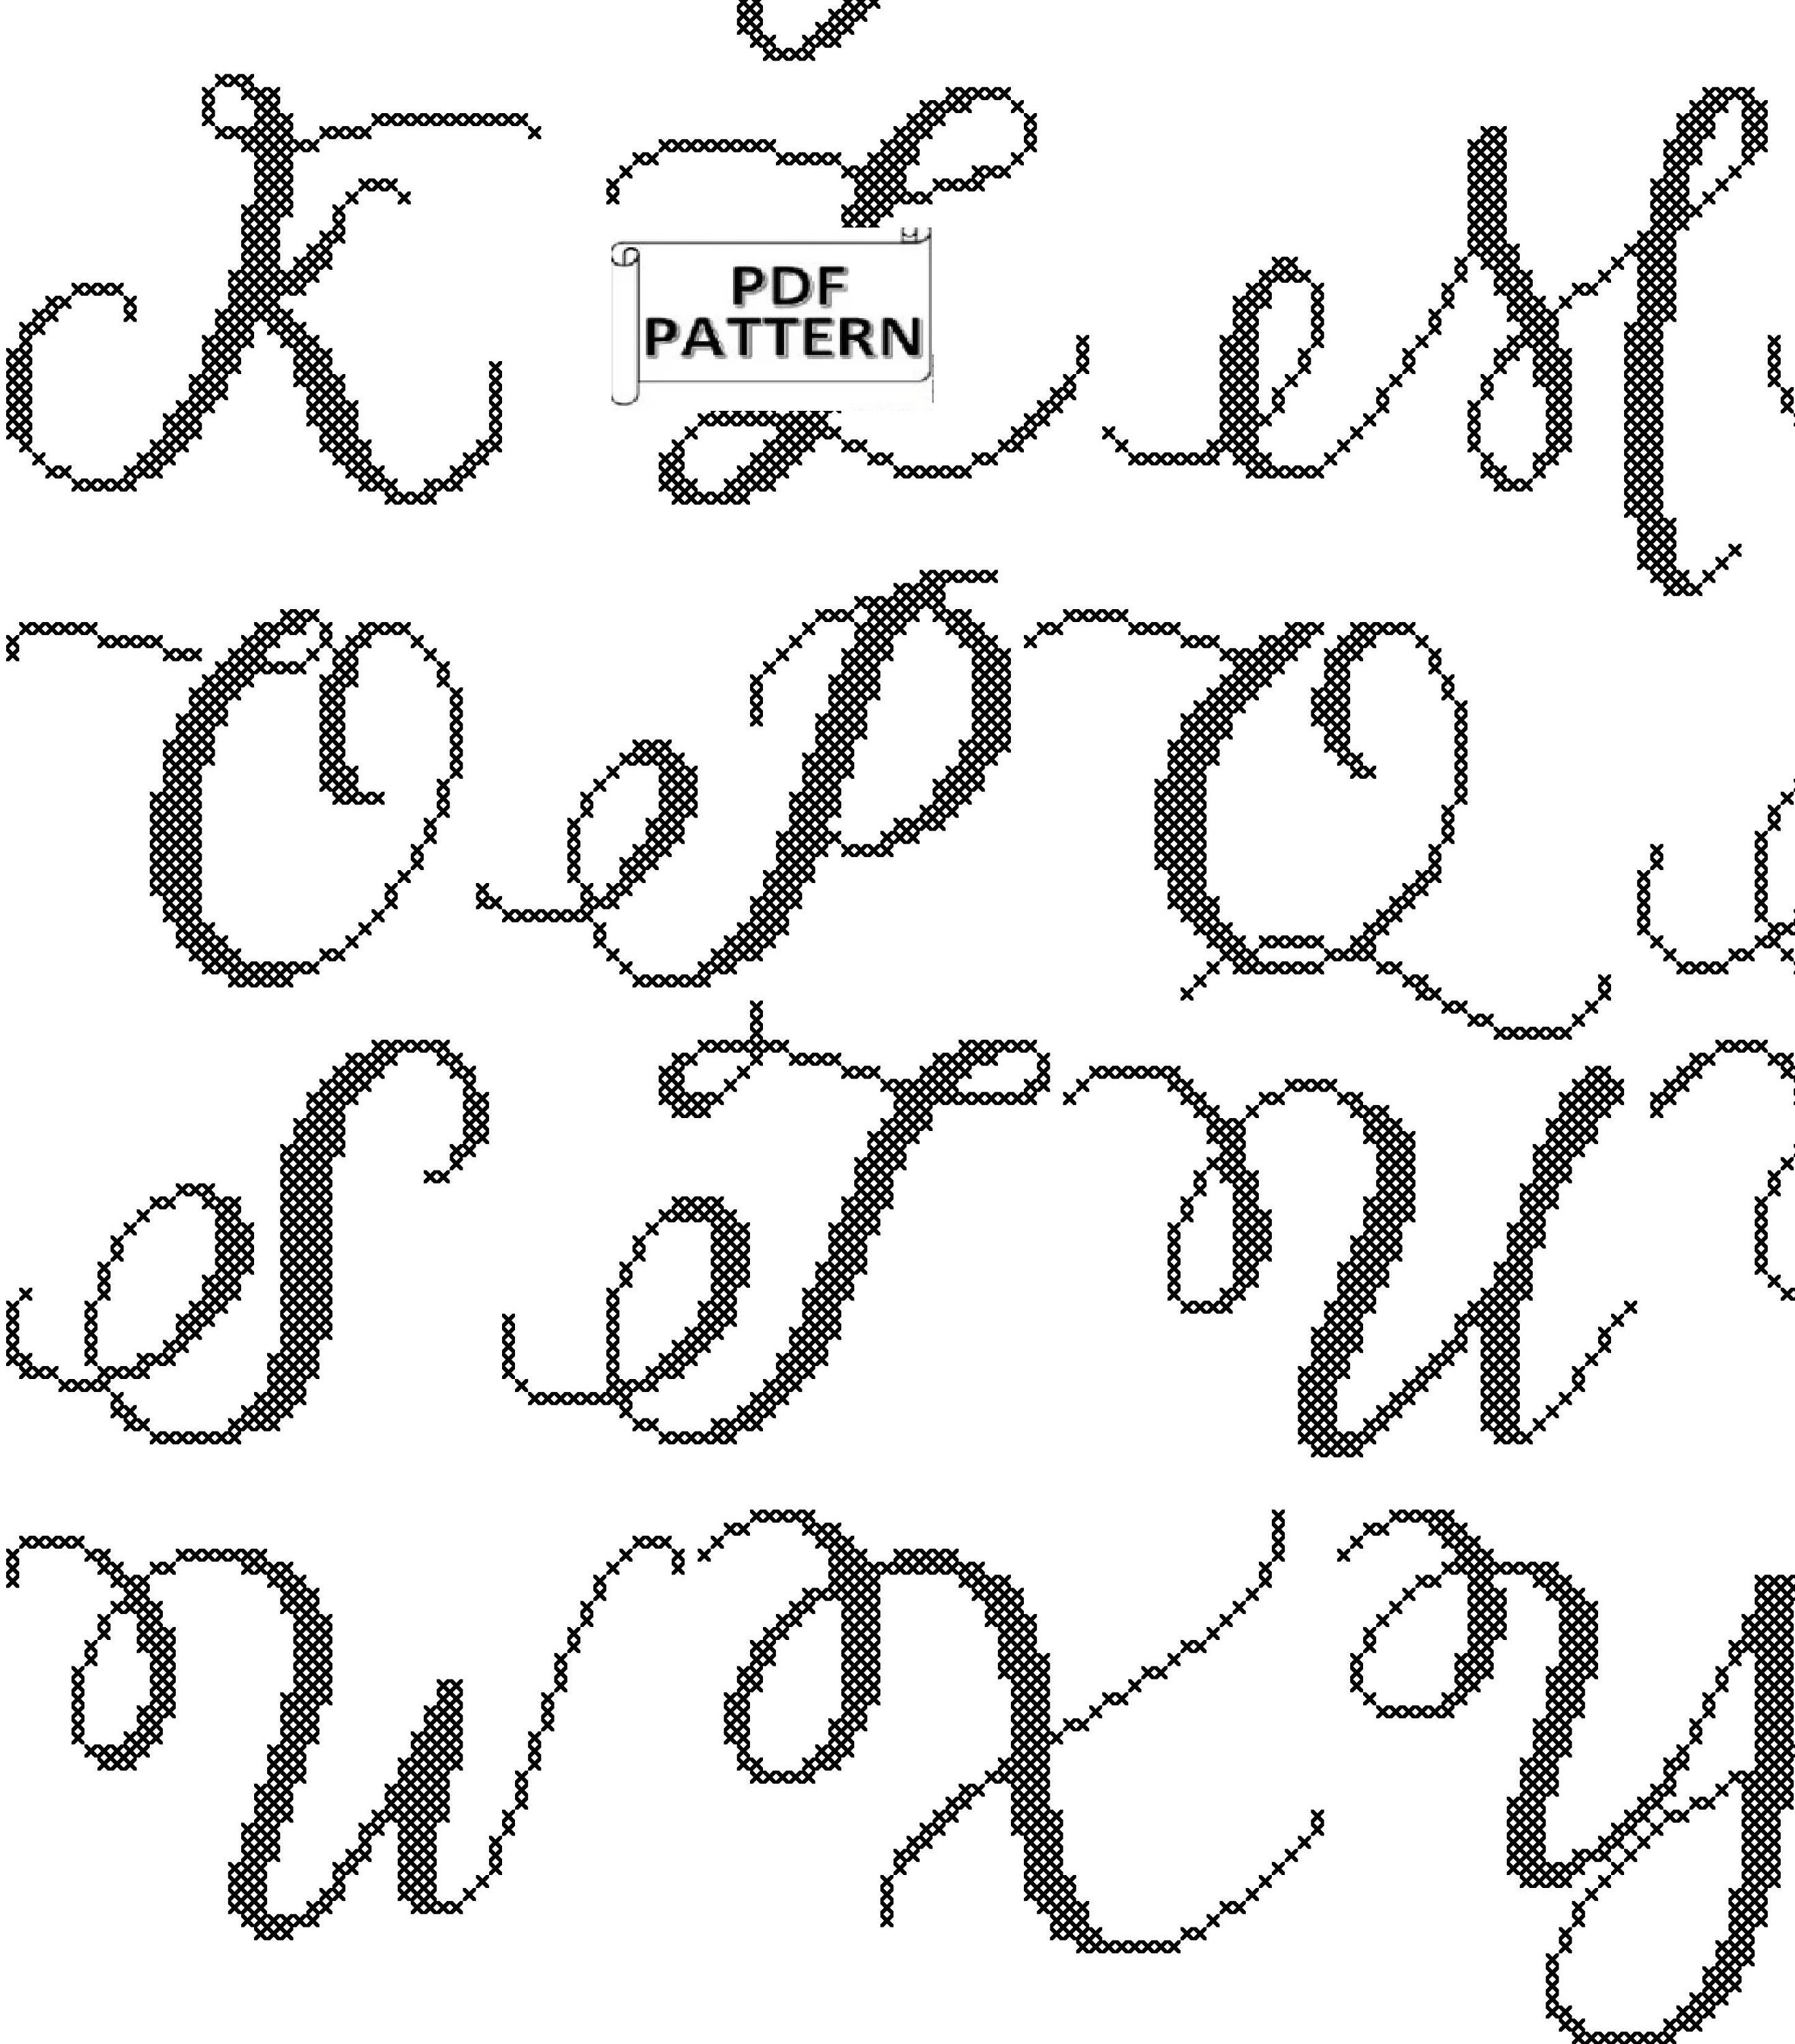 Basic Modern Calligraphy Practice Sheets by theinkyhand Lowercase Alphabet  // DIGITAL DOWNLOAD 